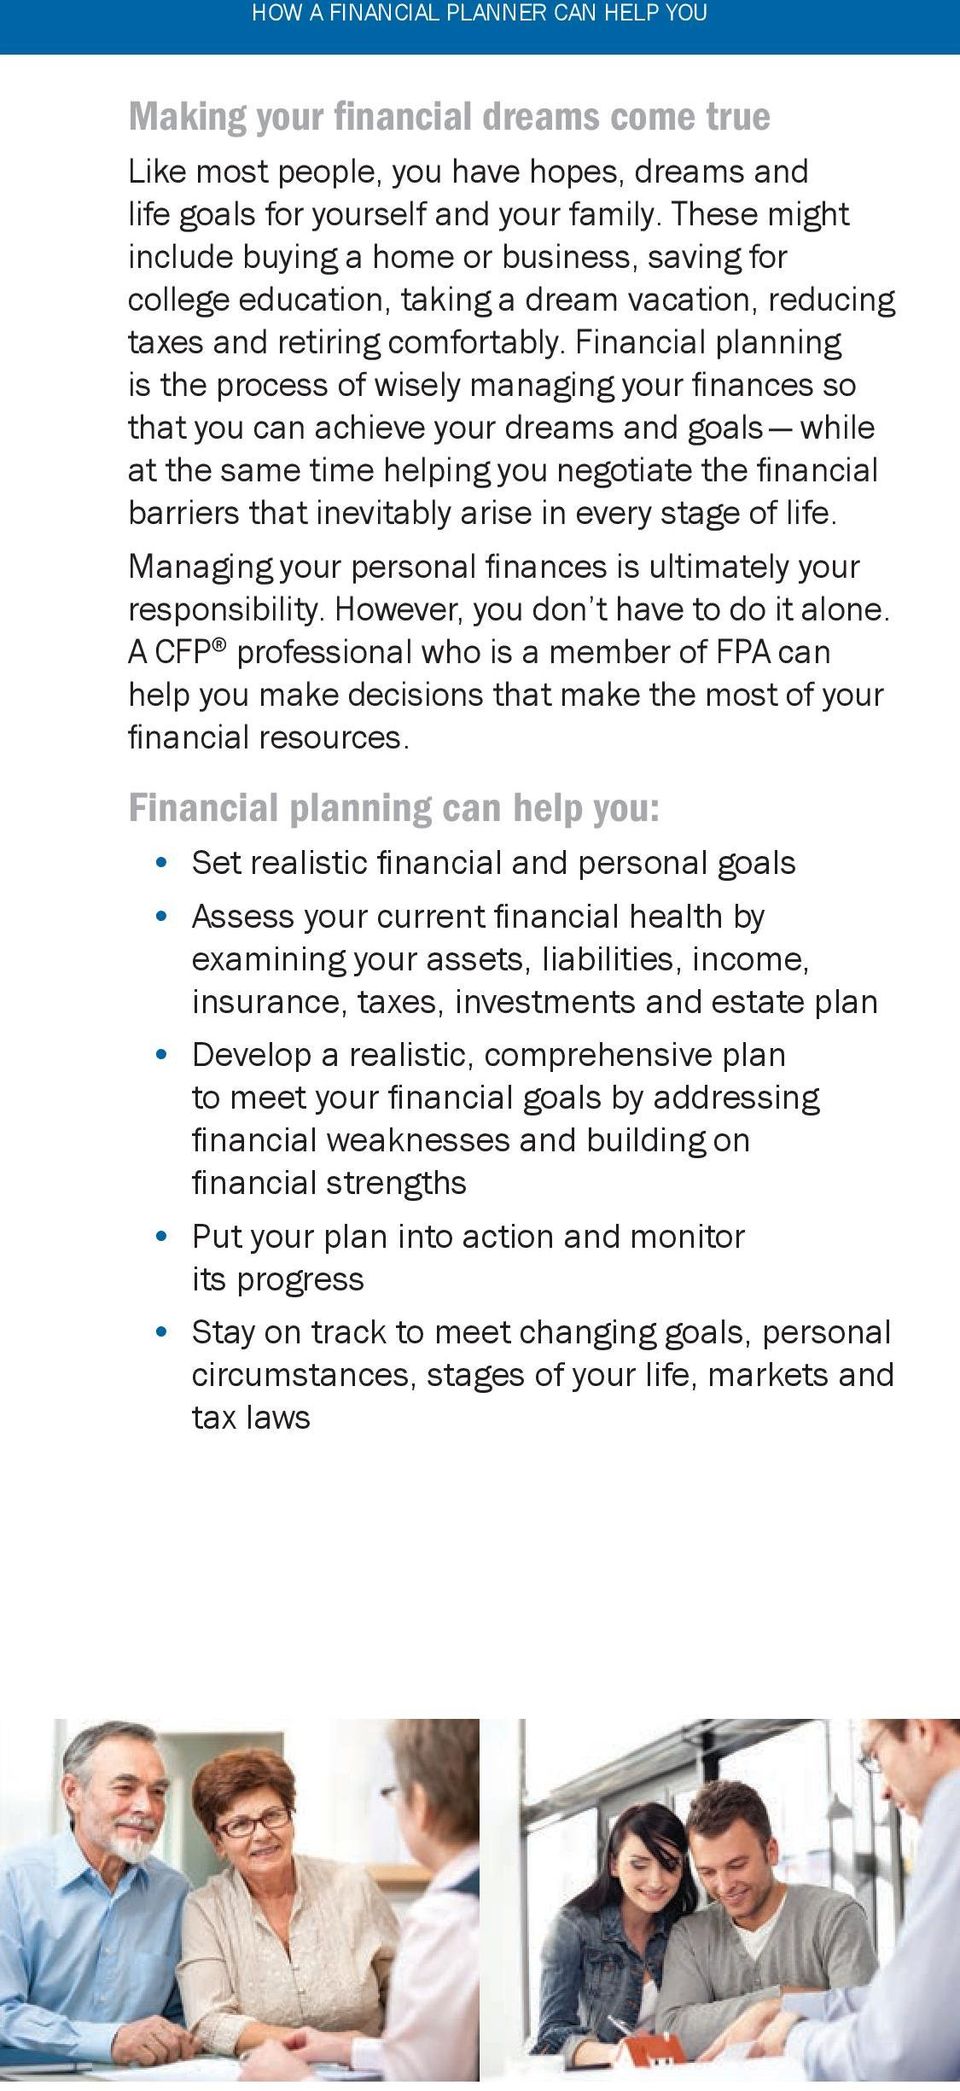 Financial planning is the process of wisely managing your finances so that you can achieve your dreams and goals while at the same time helping you negotiate the financial barriers that inevitably